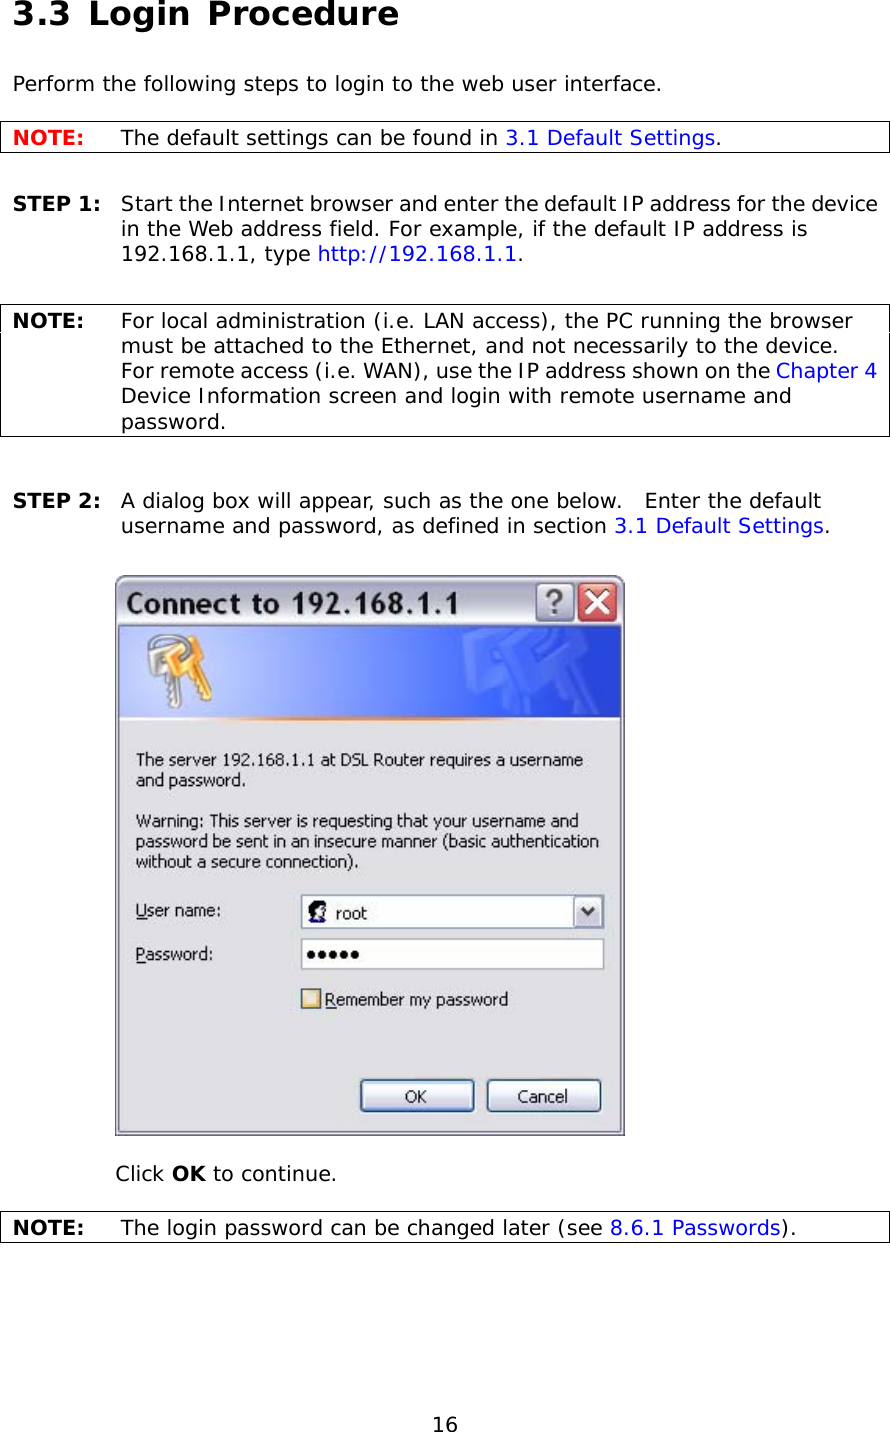  16 3.3 Login Procedure Perform the following steps to login to the web user interface.    NOTE:  The default settings can be found in 3.1 Default Settings.     STEP 1:  Start the Internet browser and enter the default IP address for the device in the Web address field. For example, if the default IP address is 192.168.1.1, type http://192.168.1.1.  NOTE:  For local administration (i.e. LAN access), the PC running the browser must be attached to the Ethernet, and not necessarily to the device.   For remote access (i.e. WAN), use the IP address shown on the Chapter 4 Device Information screen and login with remote username and password.  STEP 2:  A dialog box will appear, such as the one below.  Enter the default username and password, as defined in section 3.1 Default Settings.      Click OK to continue.  NOTE:   The login password can be changed later (see 8.6.1 Passwords). 